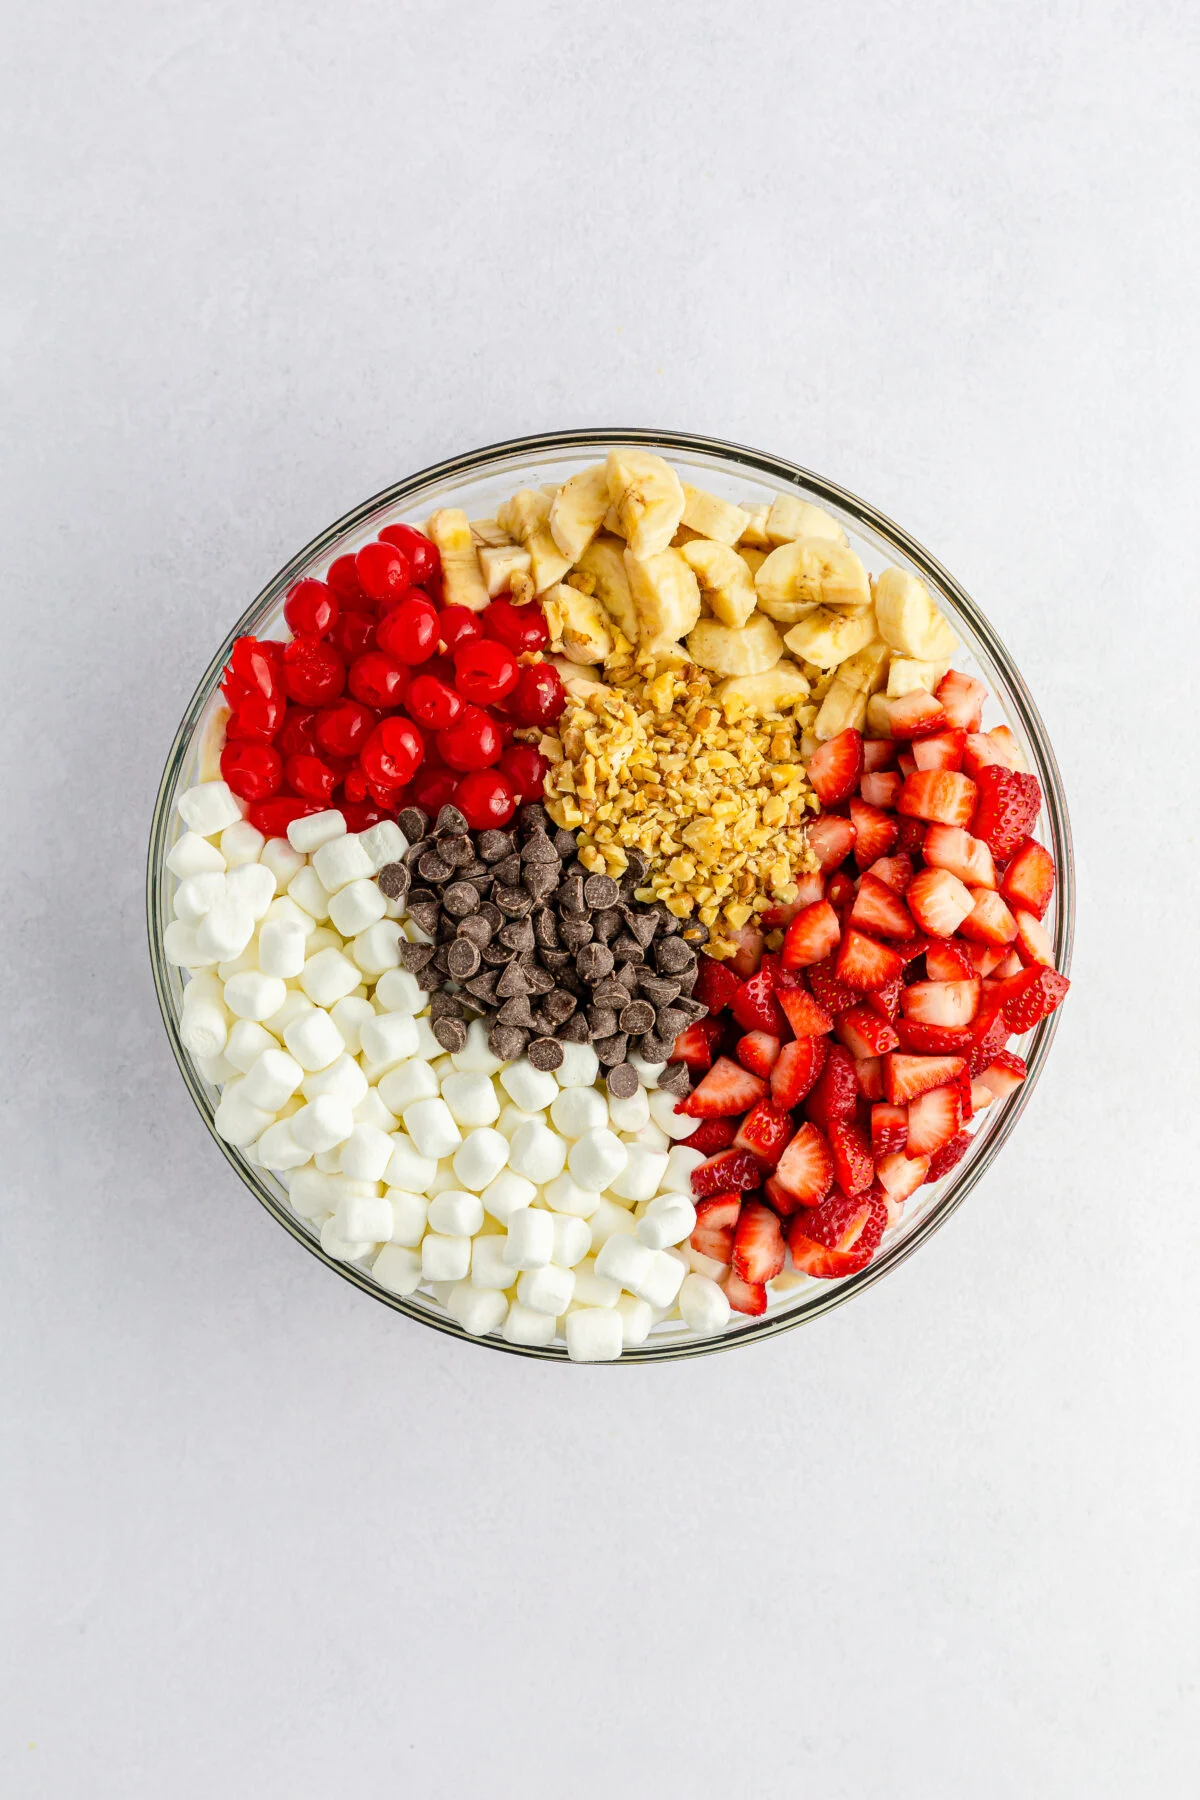 Fruit, marshmallows, chocolate, and nuts added to the dressing.